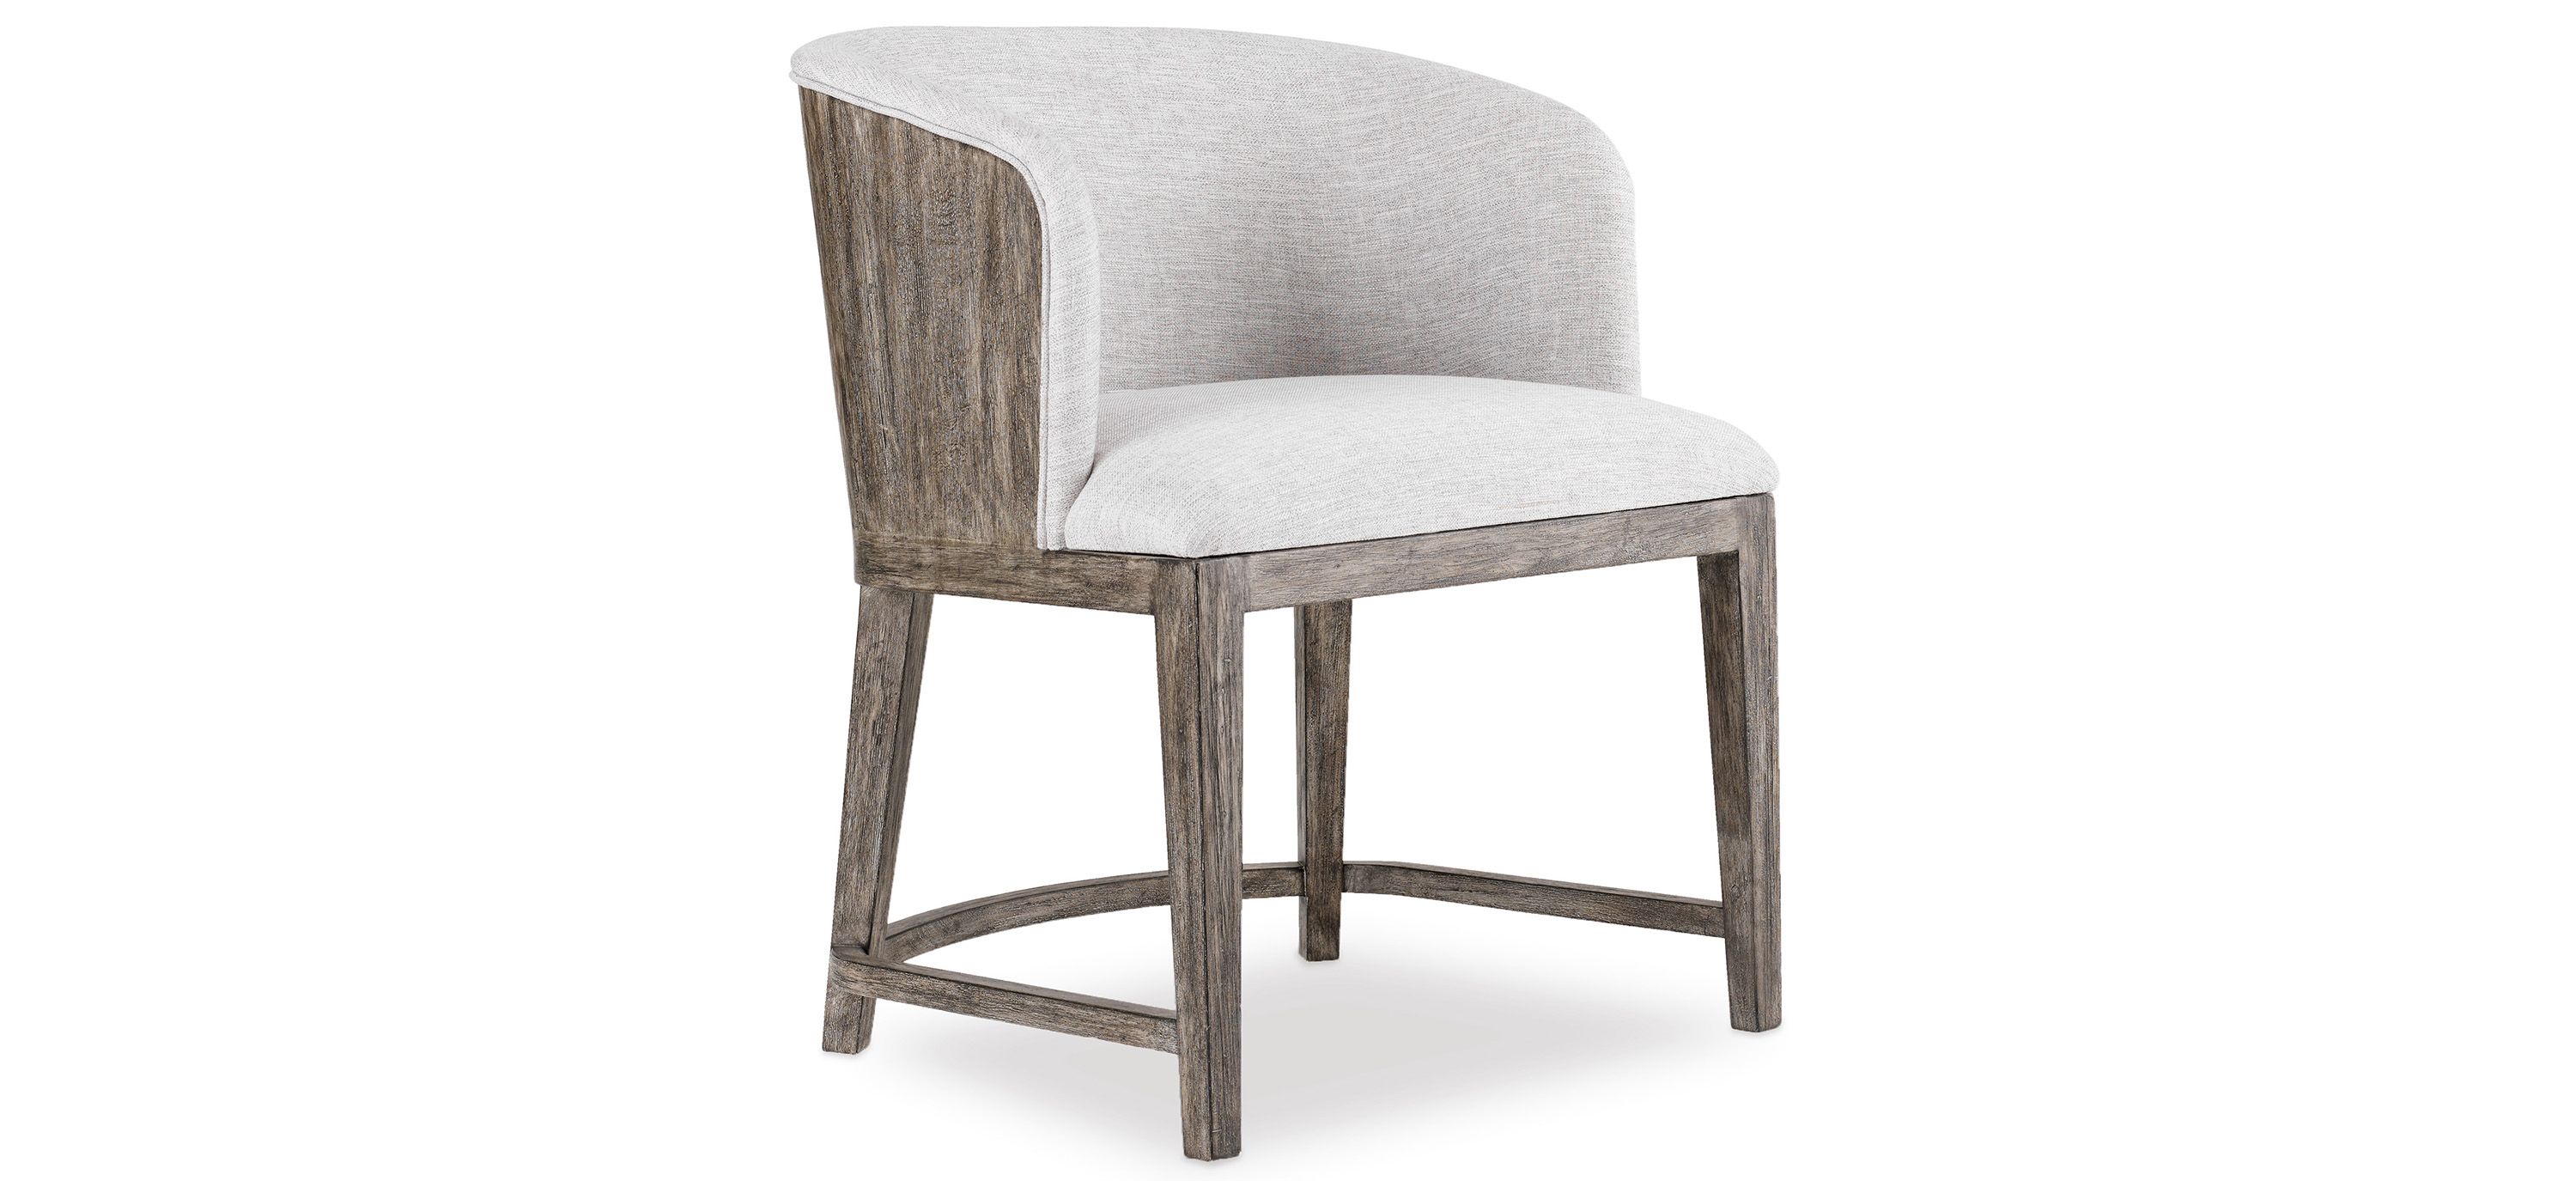 Curata Upholstered Dining Chair with Wood Back